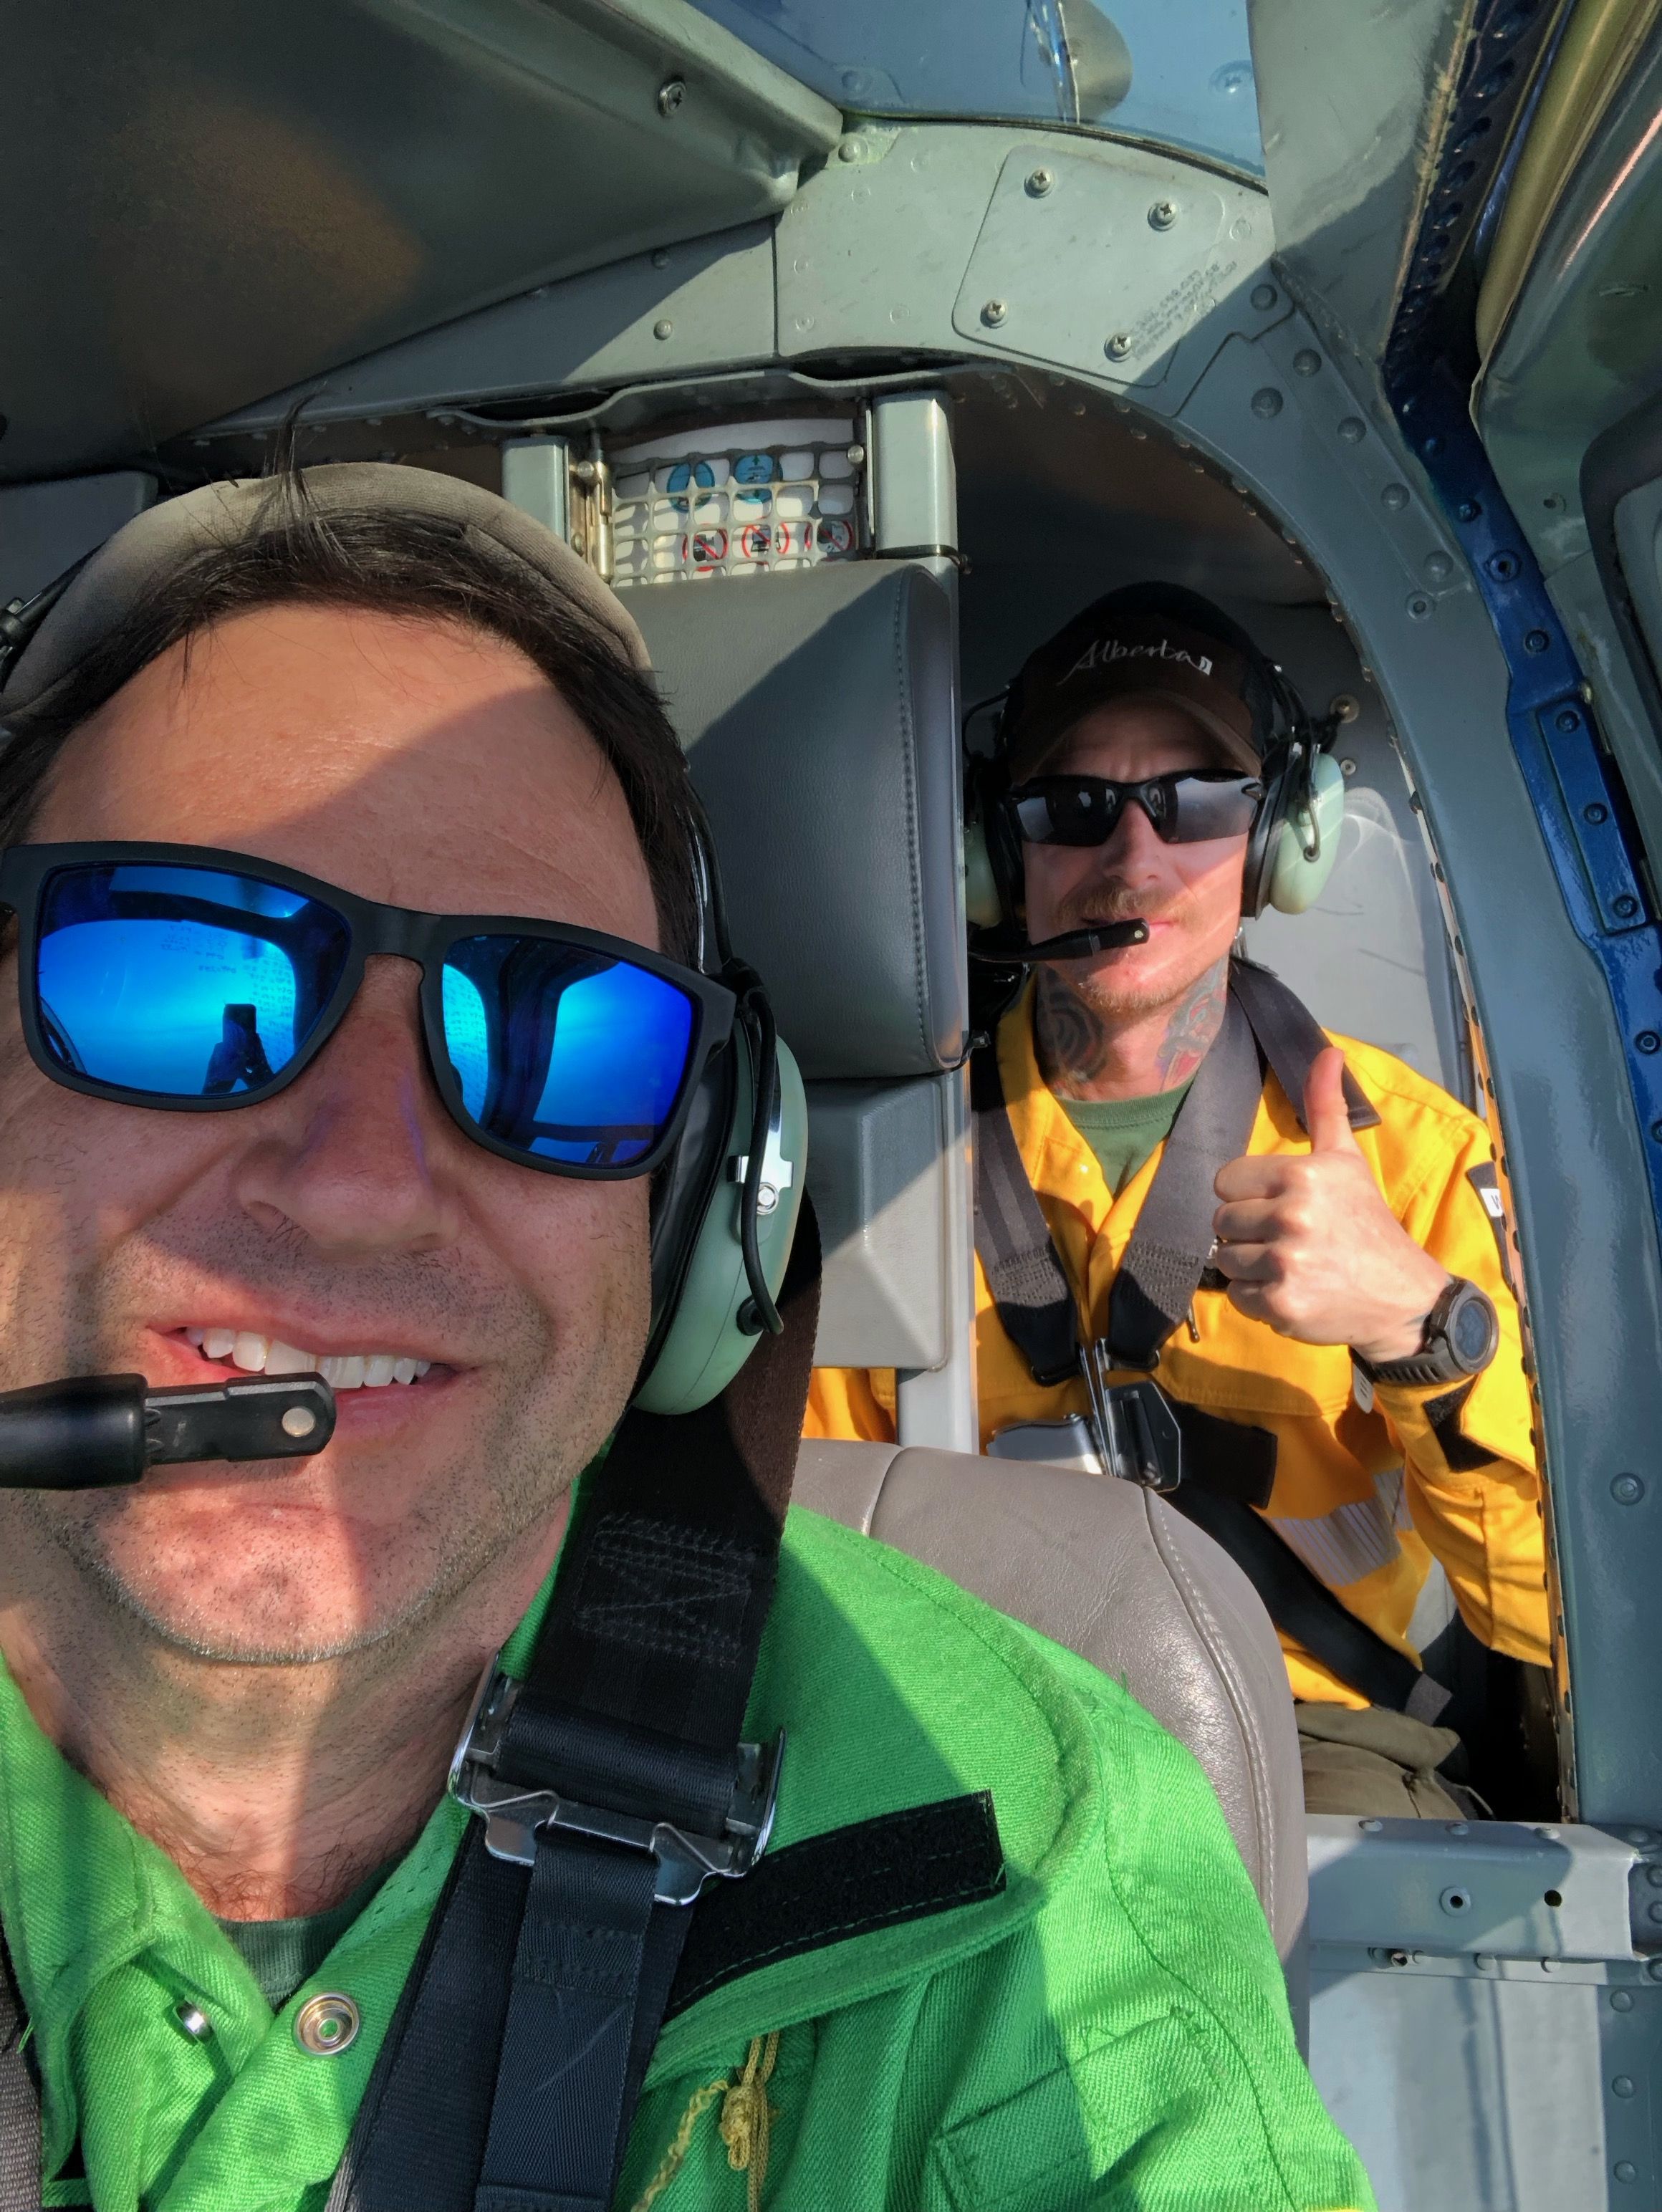 Damian Sharrock is a senior program officer in the Loddon Mallee region’s Land and Built Environment team and holds an emergency role as aircraft officer.